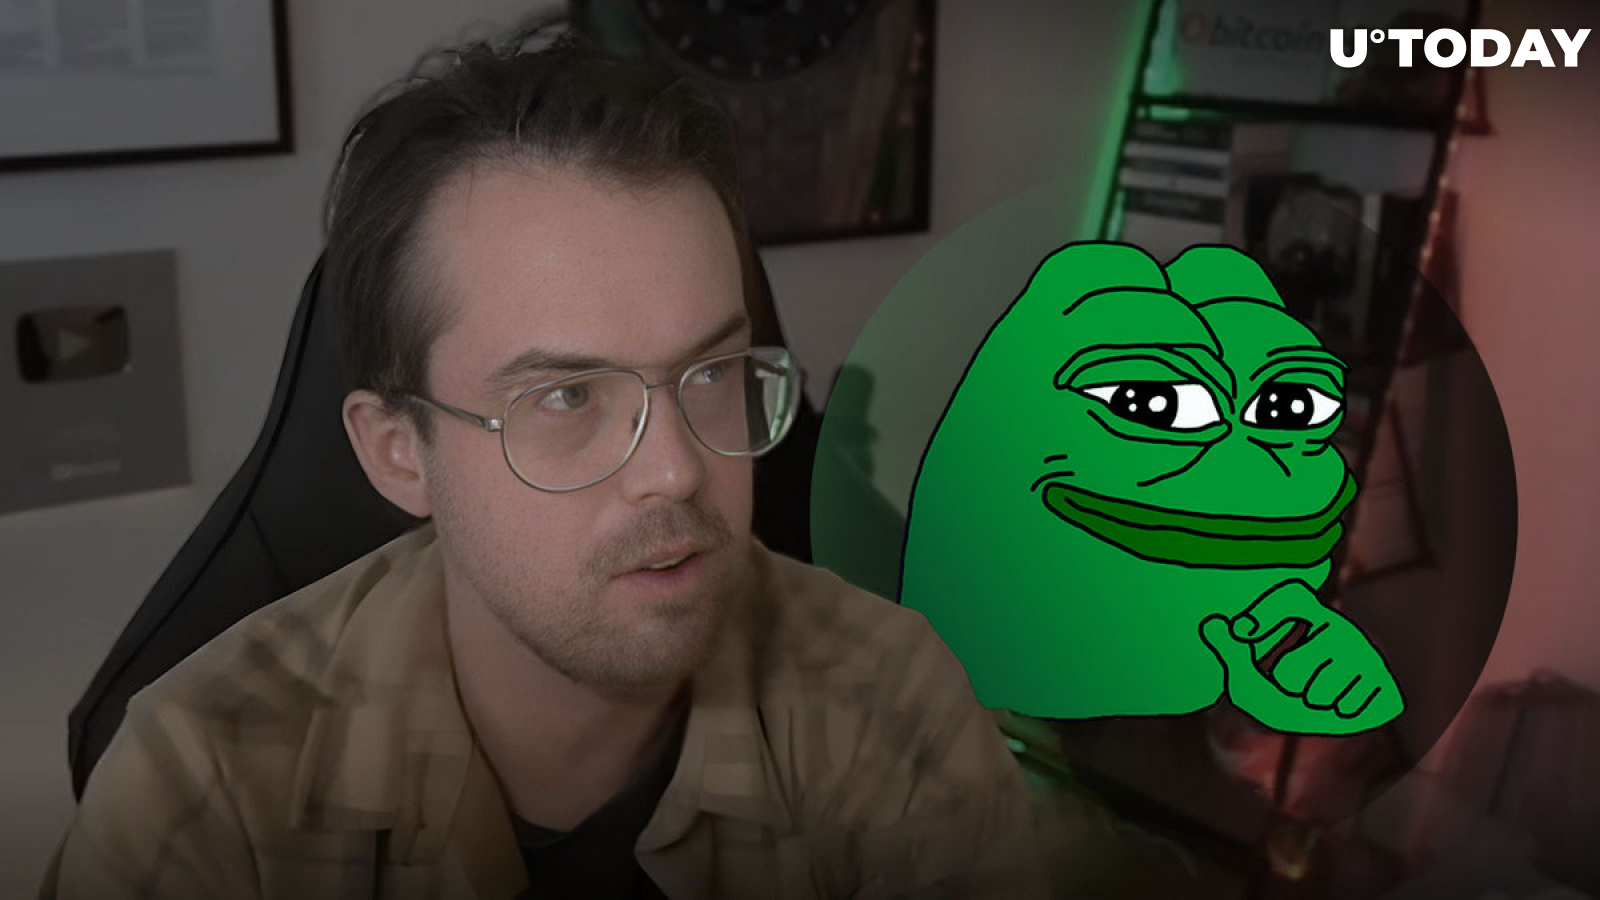 I'm Not Interested in Meme Coins Long Term, Prominent Analyst Says, Here's What He Buys